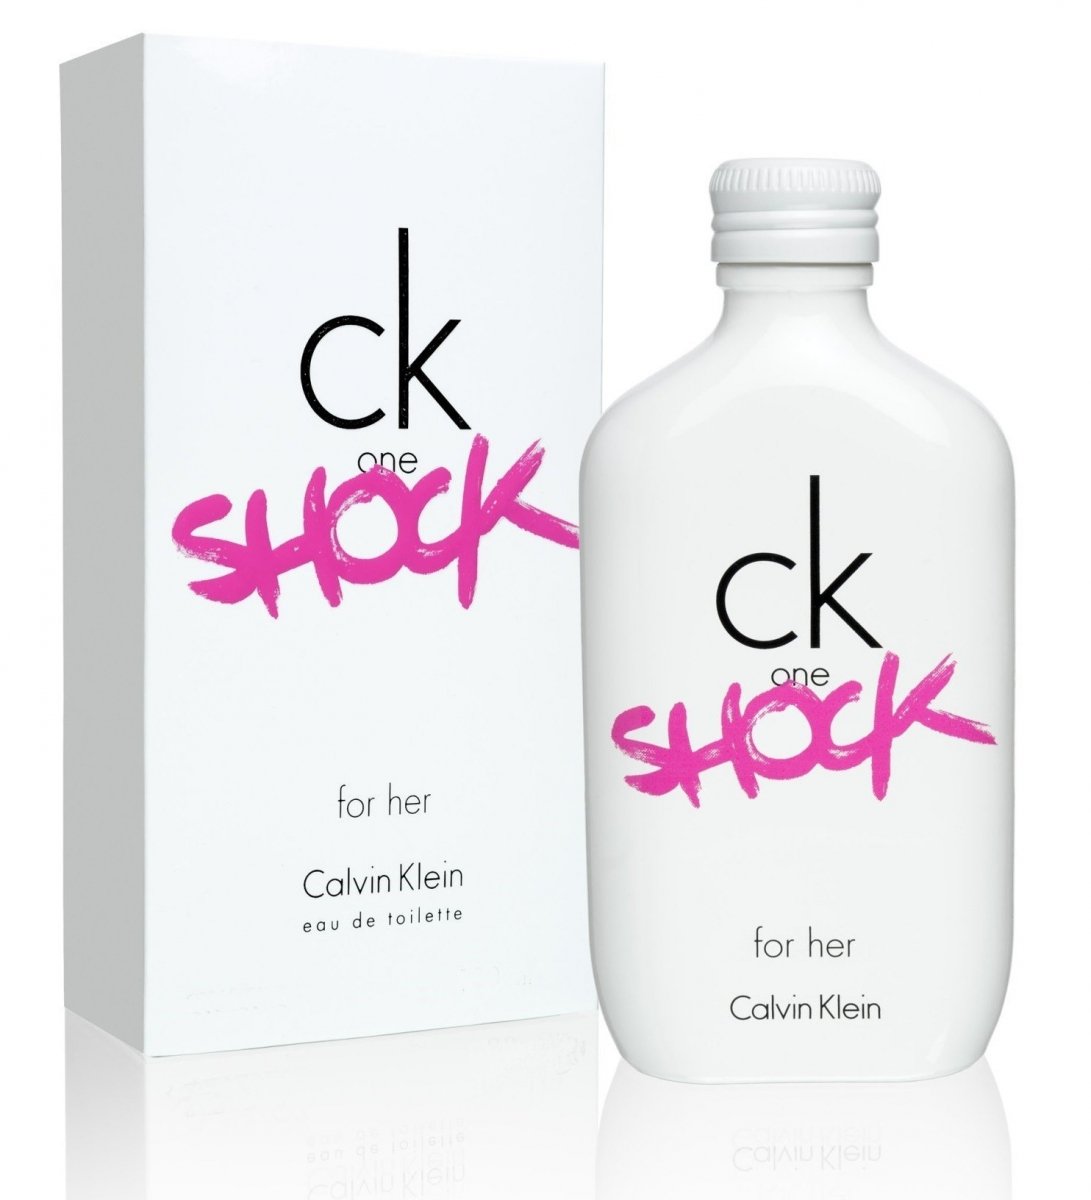 morphine Pat Still CK One Shock for Her by Calvin Klein » Reviews & Perfume Facts